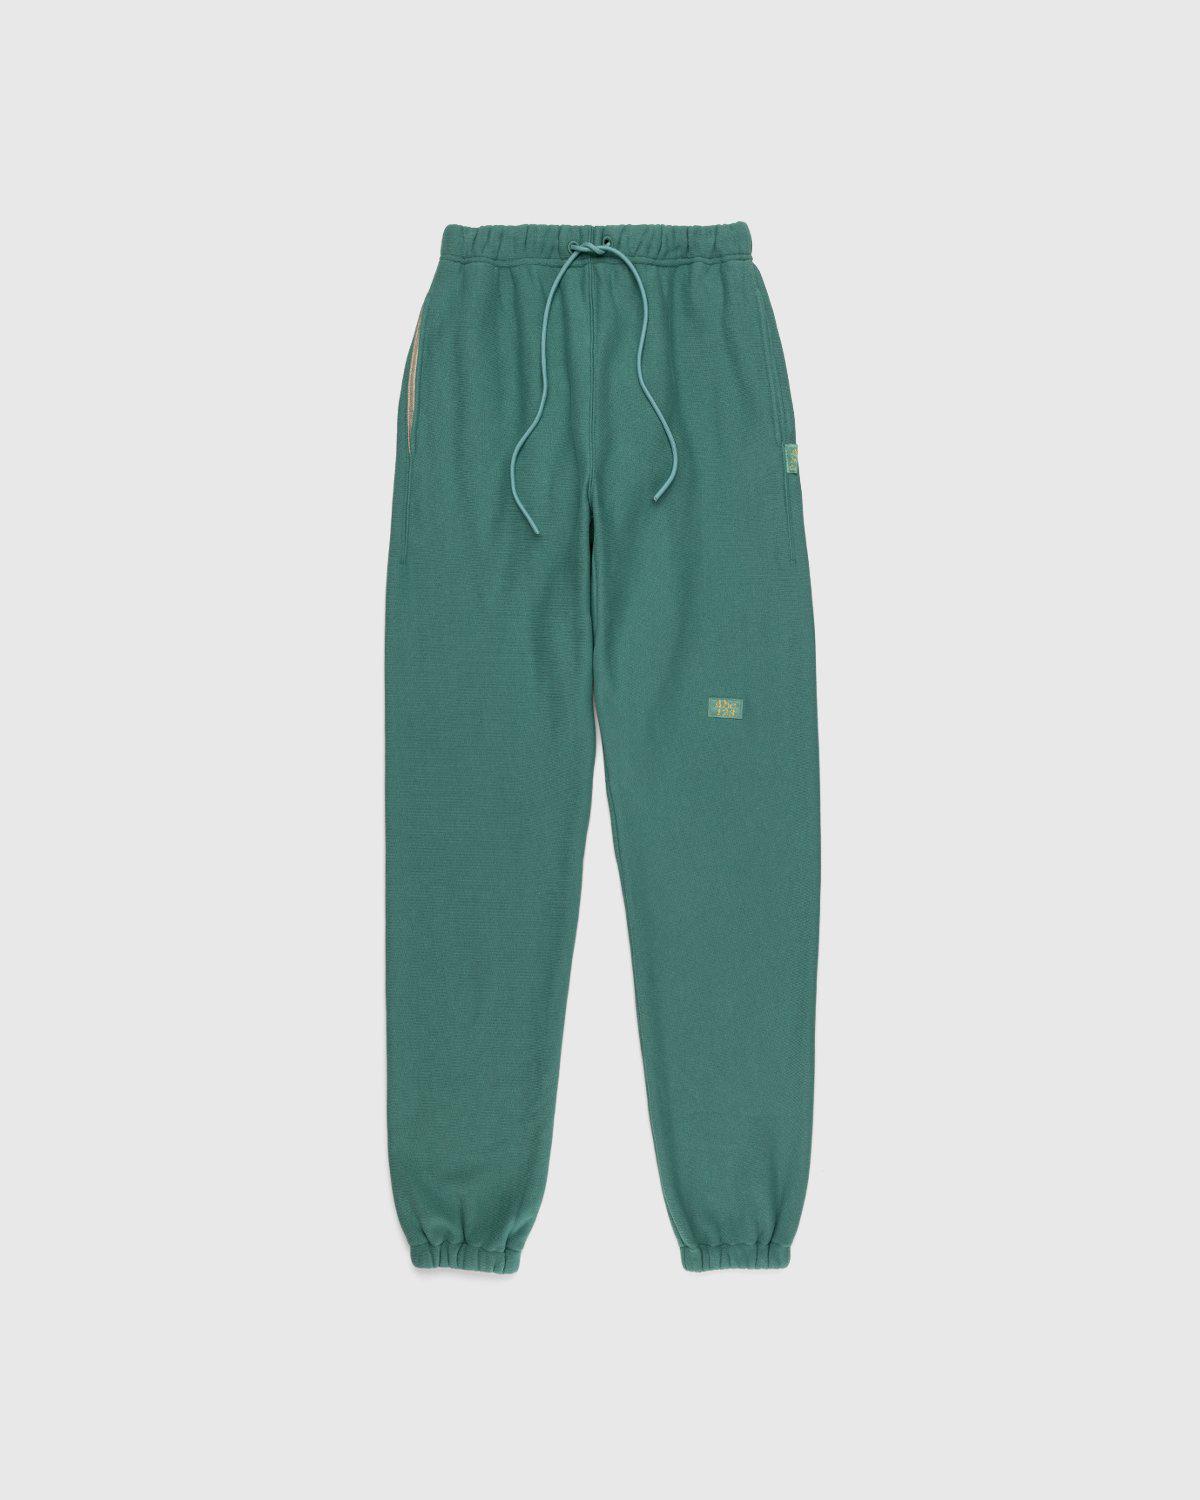 Abc. – French Terry Sweatpants Apatite by ABC.